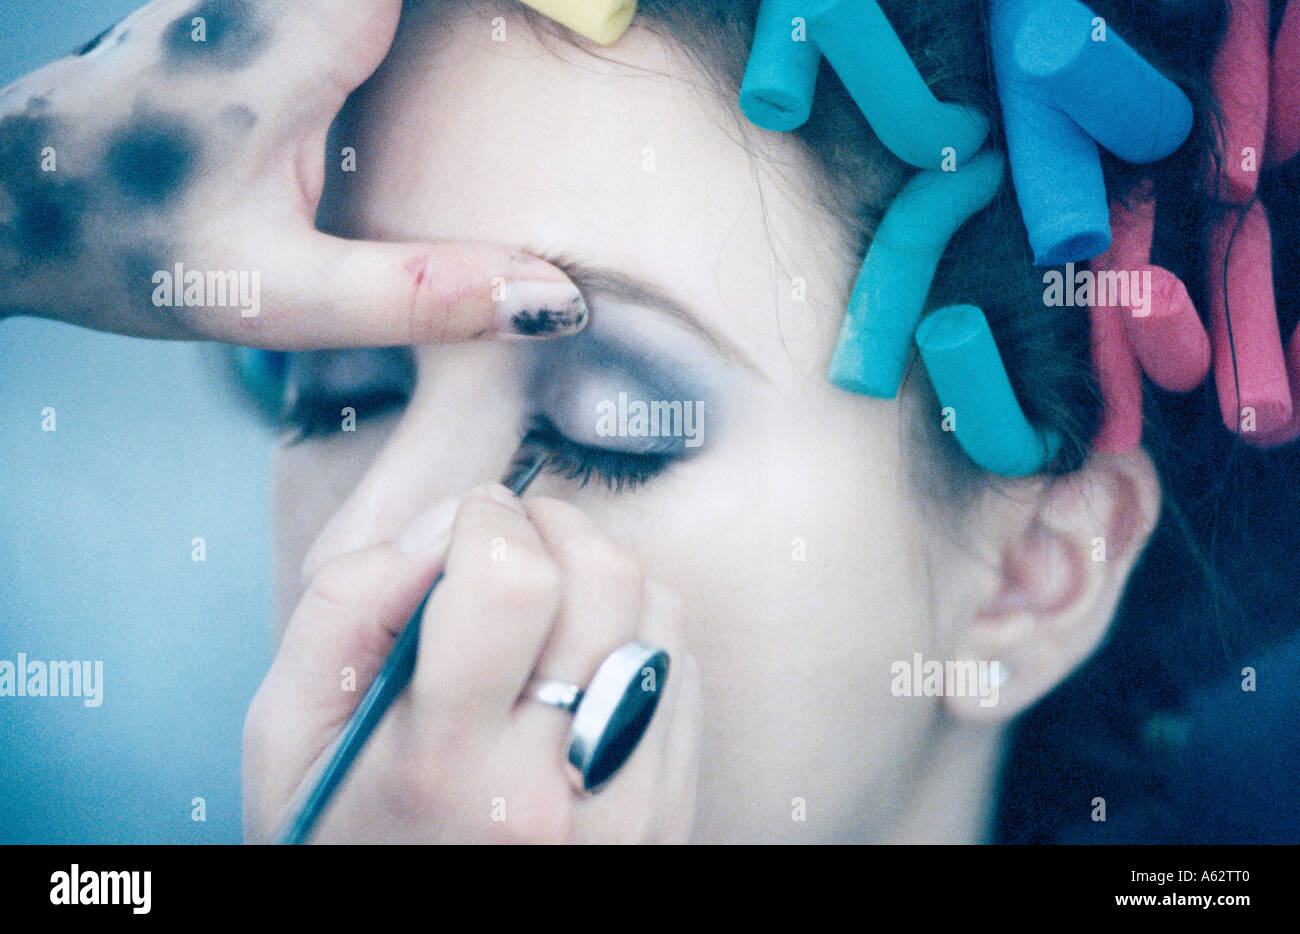 Close-up of person's hand applying eye shadow on young woman's eye Stock Photo